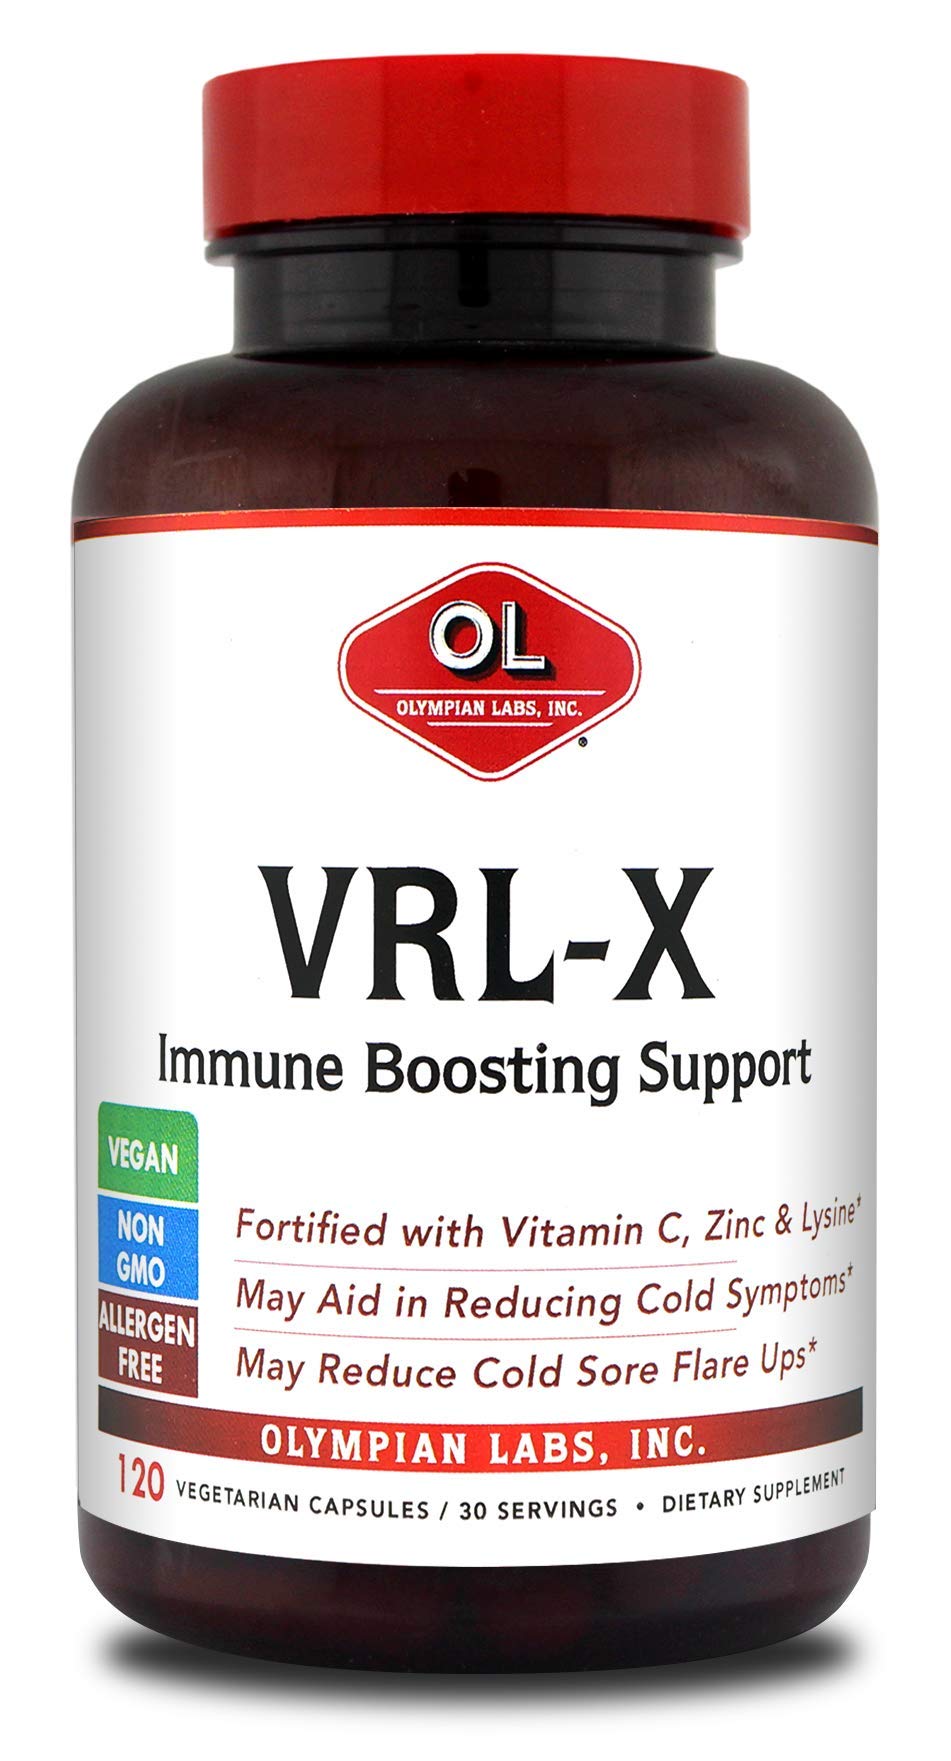 Olympian Labs VRL-X Advanced Immune Support, Vitamin C, Zinc & Lysine, May Aid in Cold Sore Relief, 120 Capsules